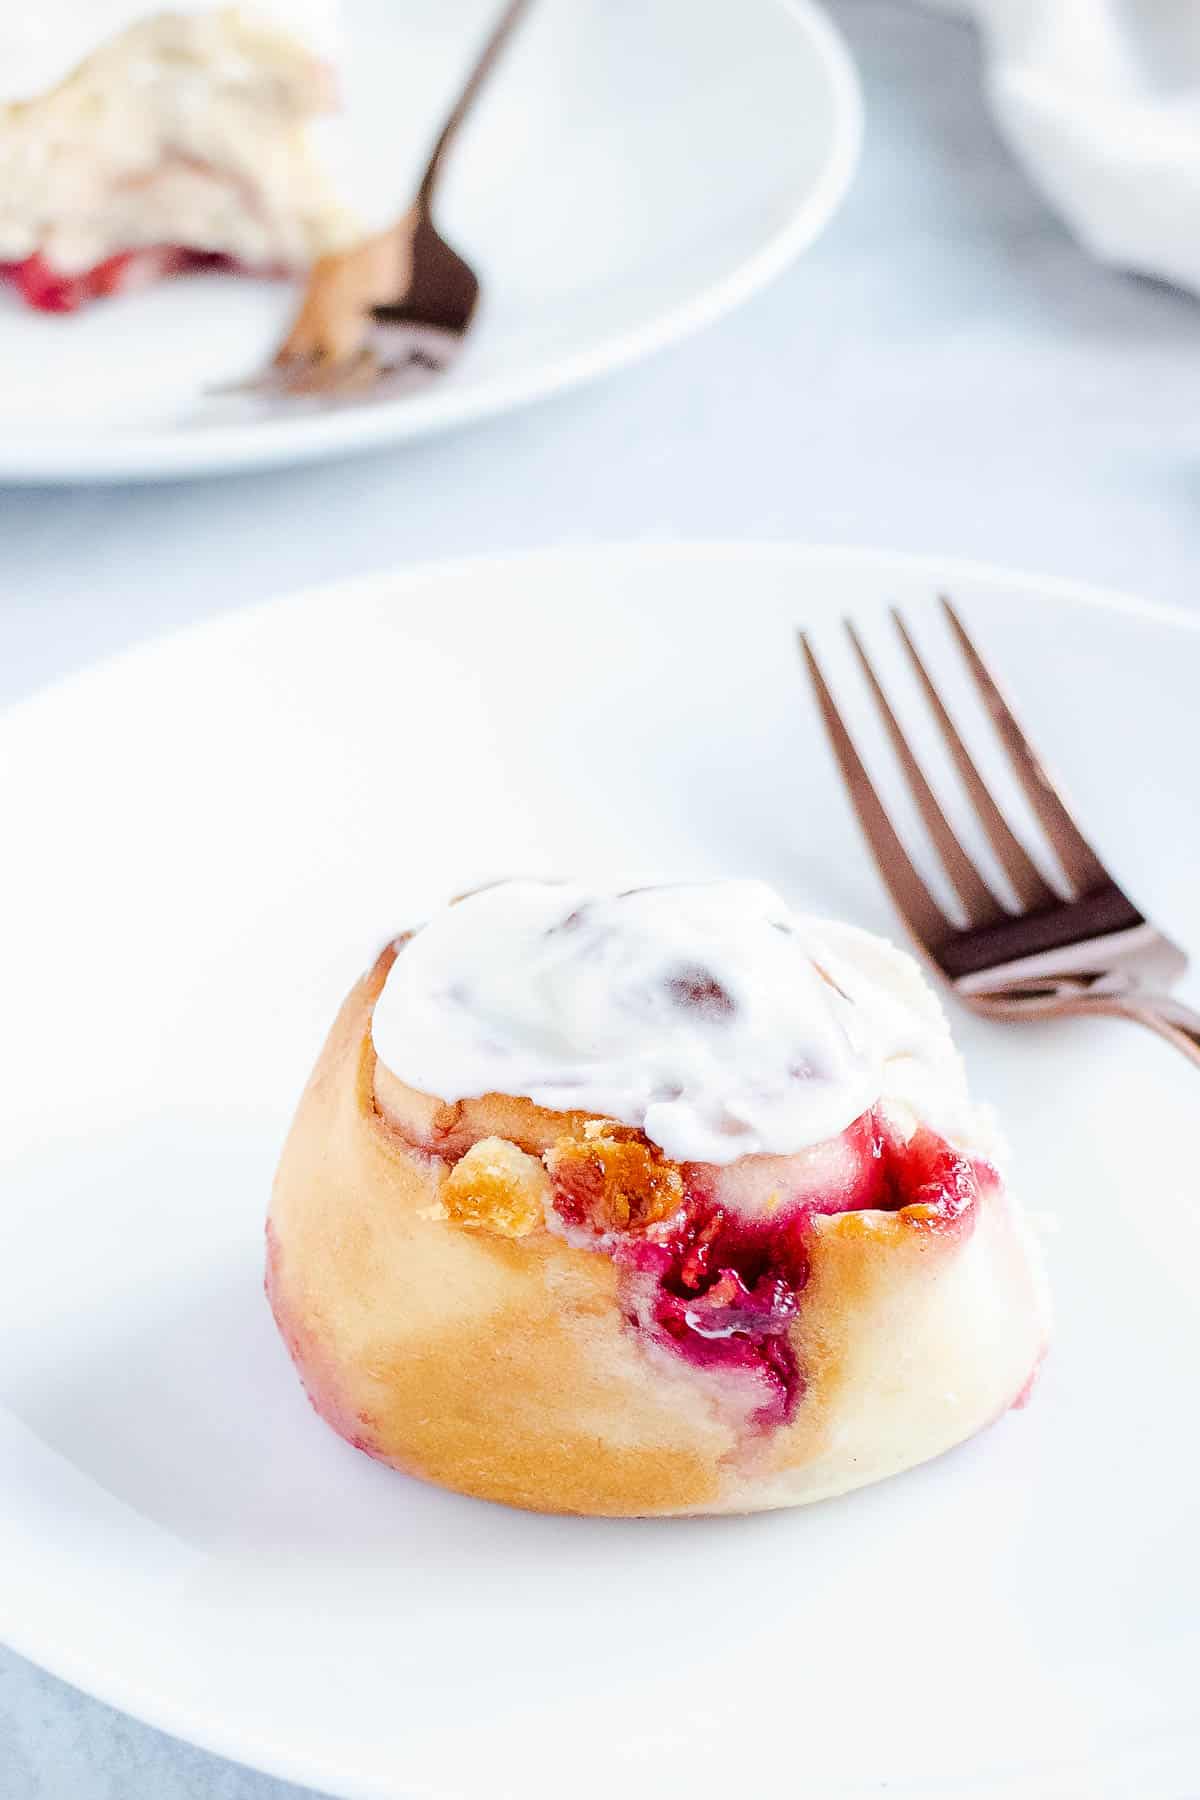 Glazed raspberrry swirl roll on a white plate with fork